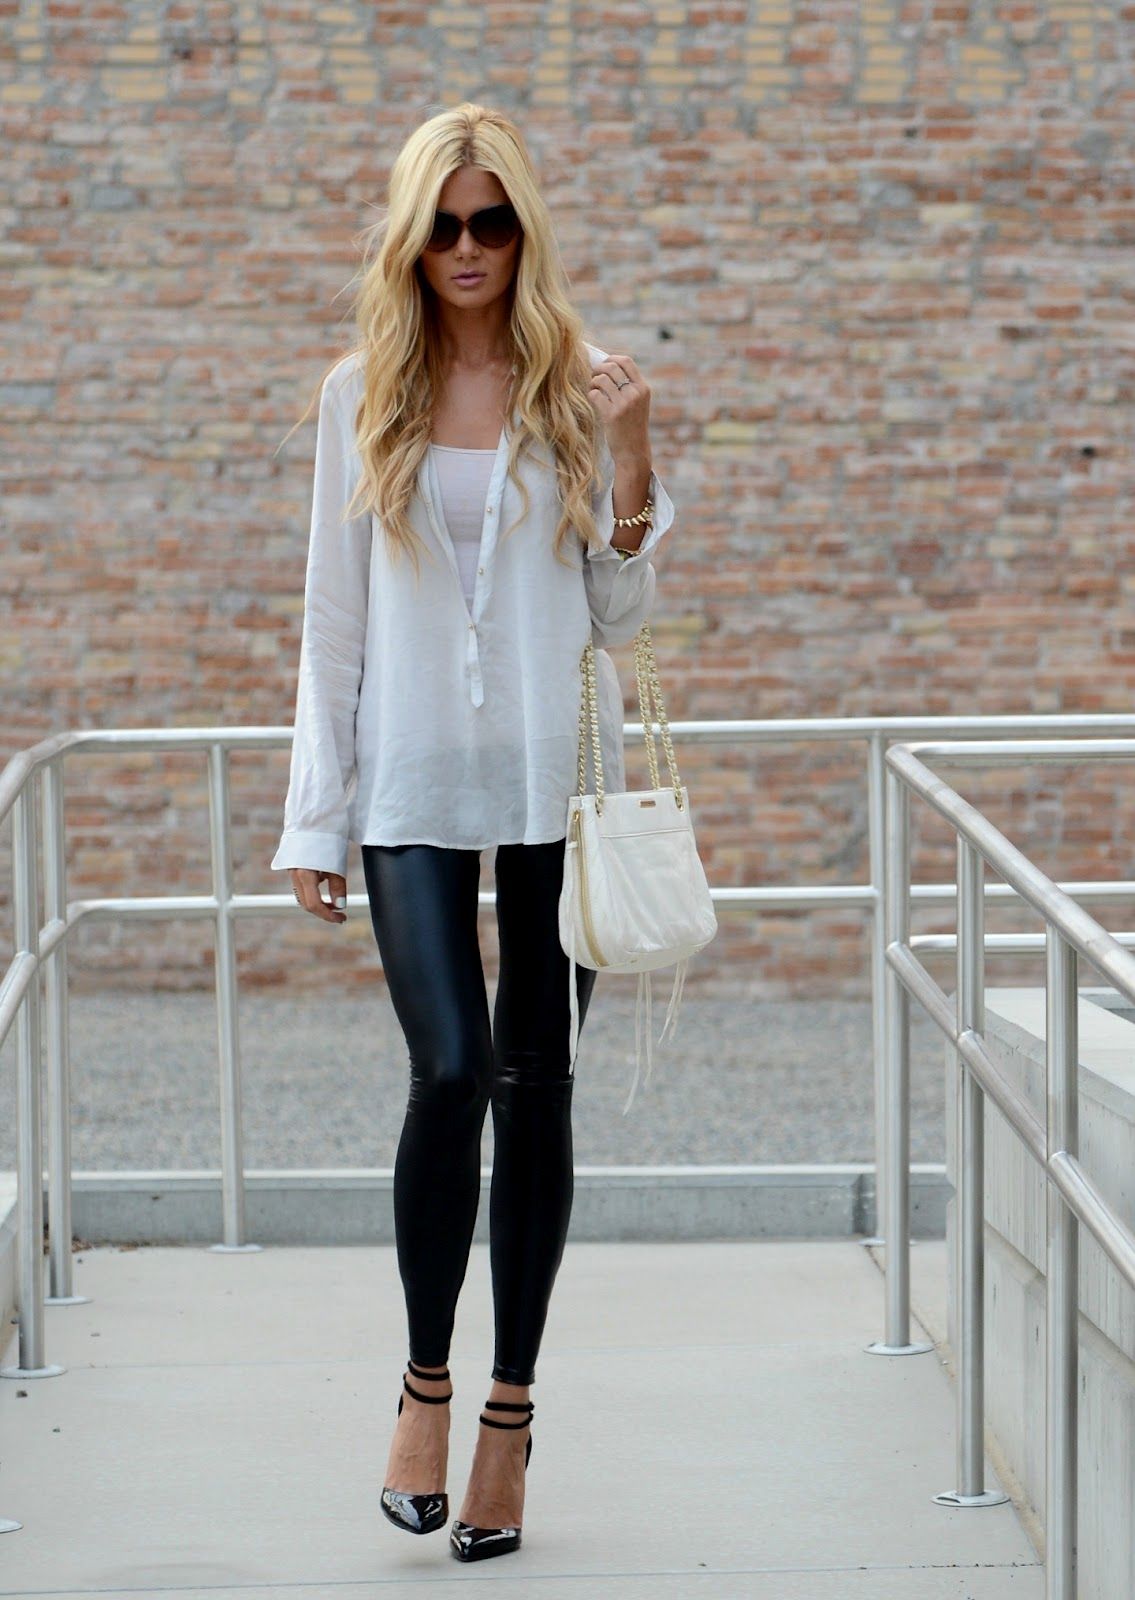 cute look- although not sure how my legs would look in fake leather pants hahahh